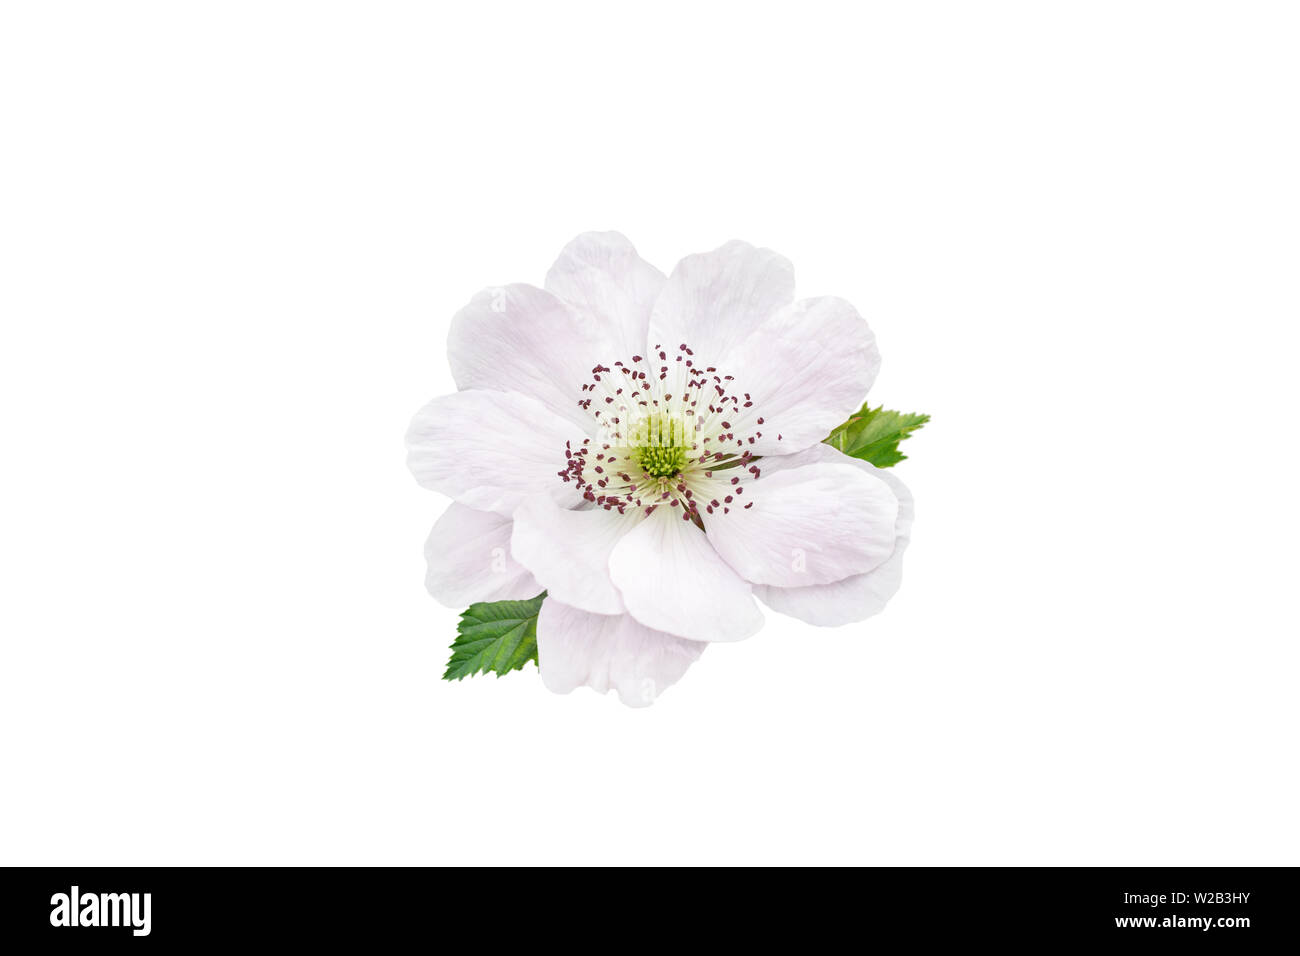 Blackberry double pale pink flower and leaves isolated on white Stock Photo